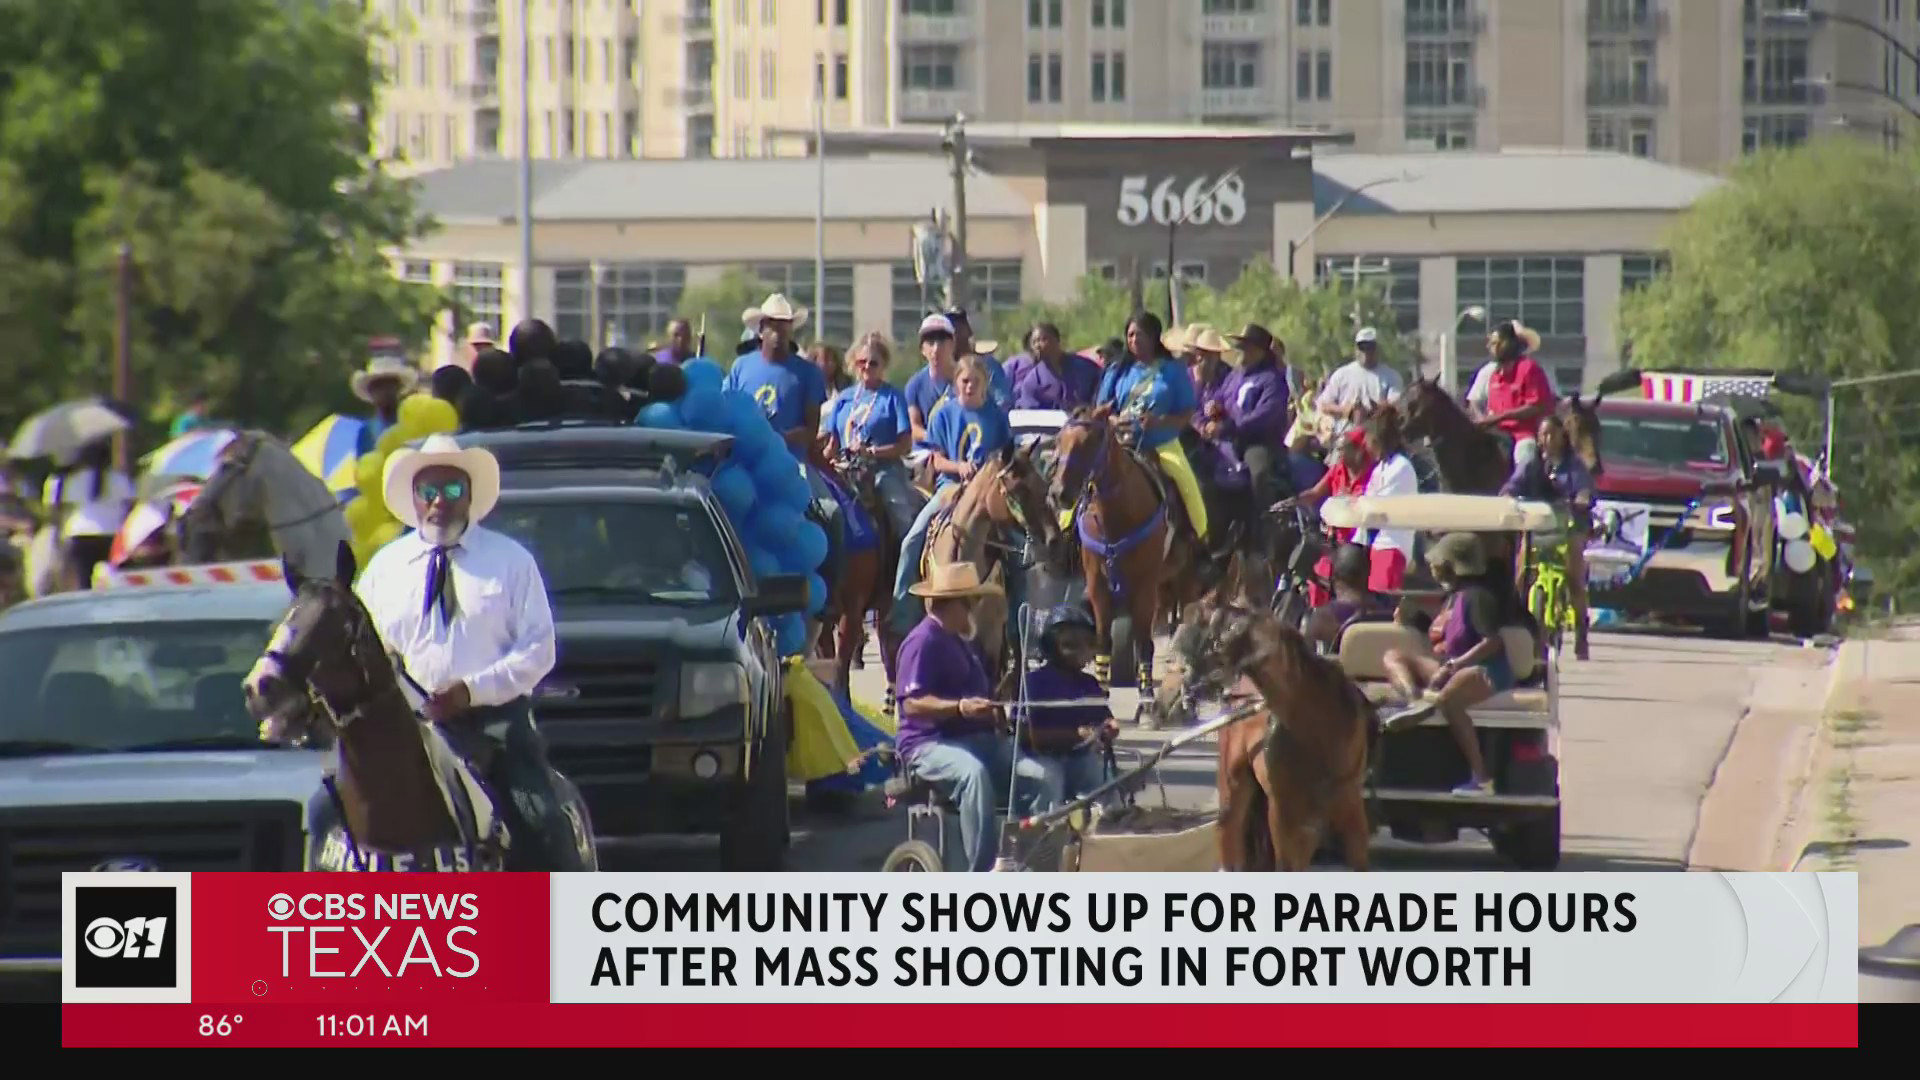 Fort Worth Como community shows up for parade hours after mass shooting